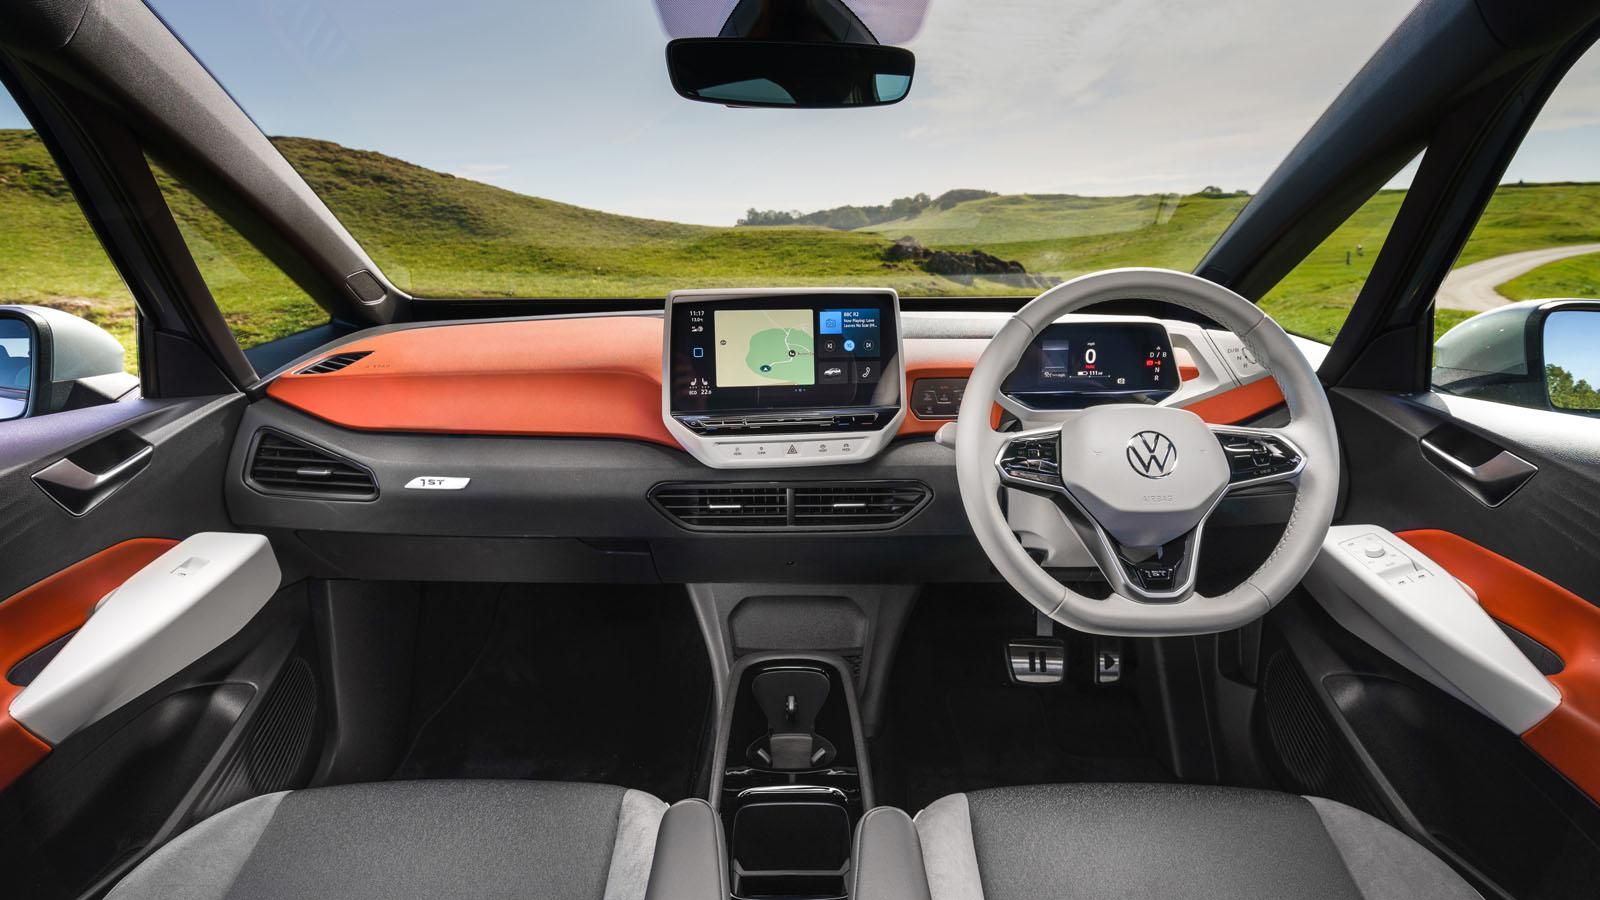 The Stylish Interior Of The Volkswagen ID.3